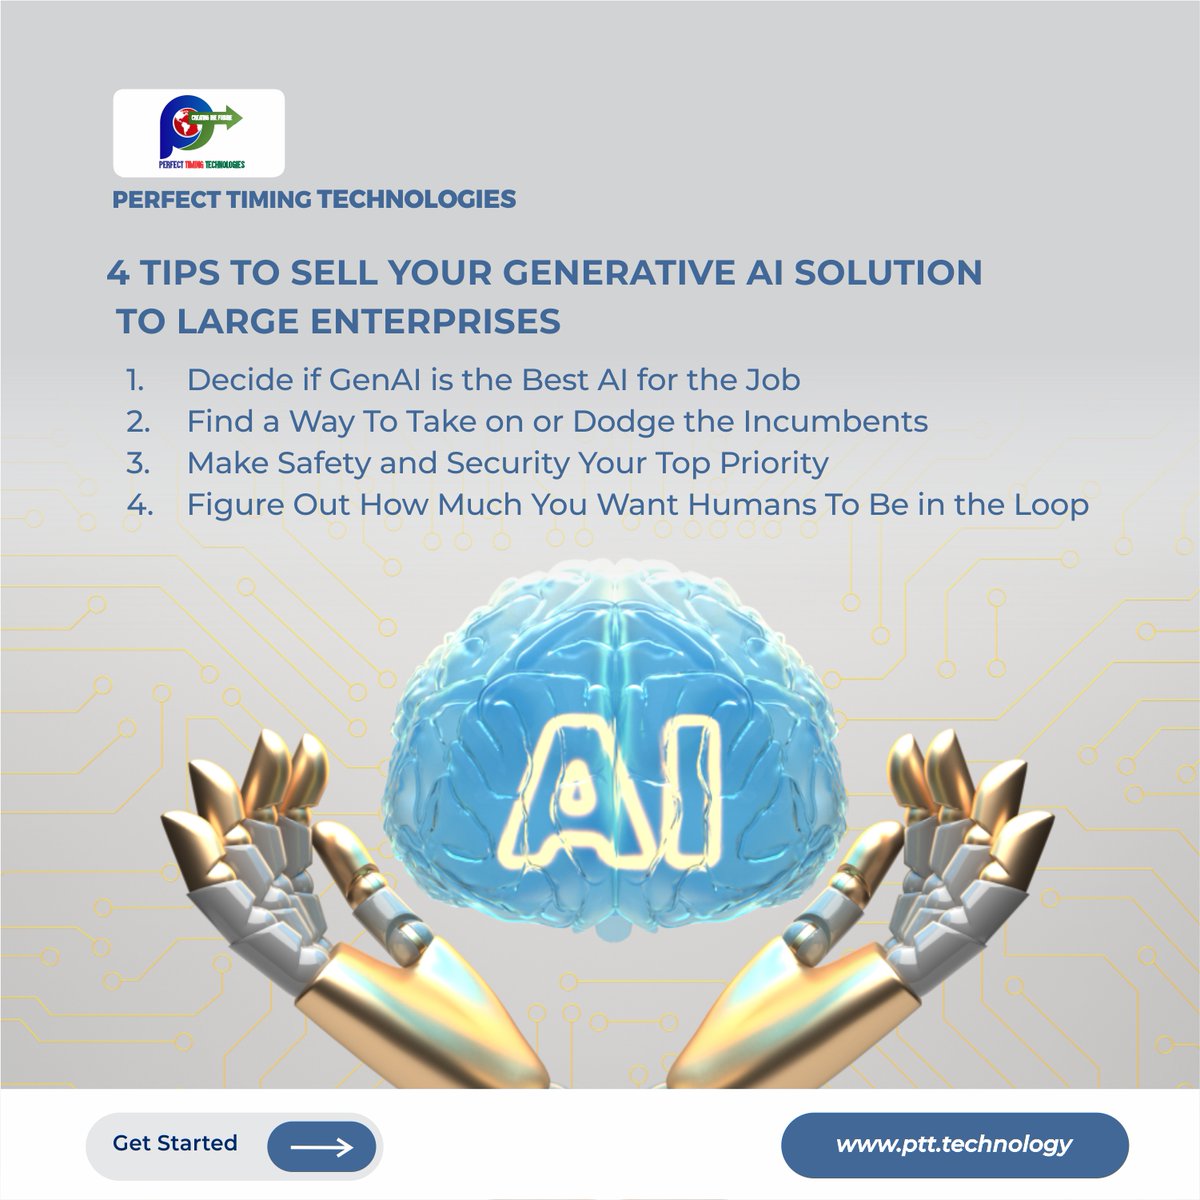 4 Tips To Sell Your Generative AI Solution To Large Enterprises

Read here: spiceworks.com/tech/artificia… 

#AI #GenerativeAI #EnterpriseTech #SalesStrategies #TechSales #ArtificialIntelligence #AIinEnterprises #TechInnovation #Business #PerfectTimingHolding #PerfectTimingTechnologies